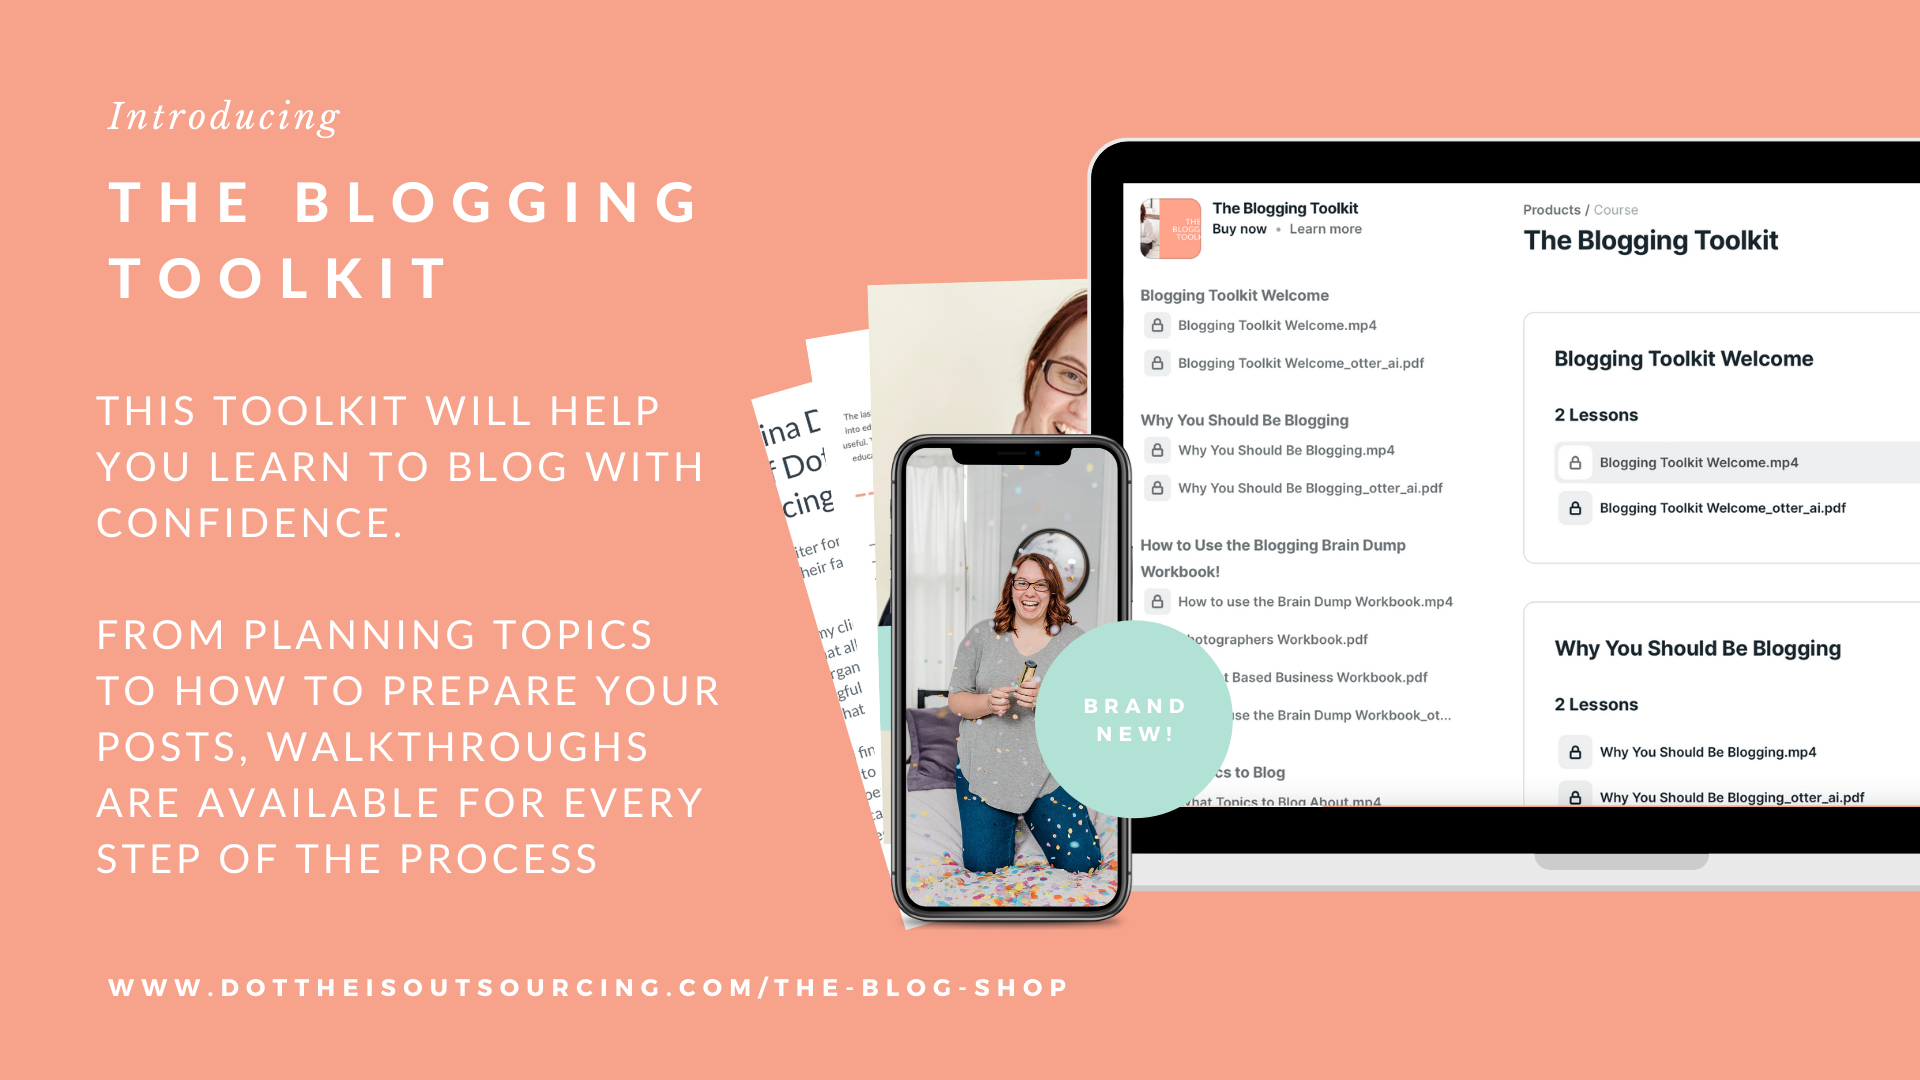 The blogging toolkit to learn how to blog with strategy and intent